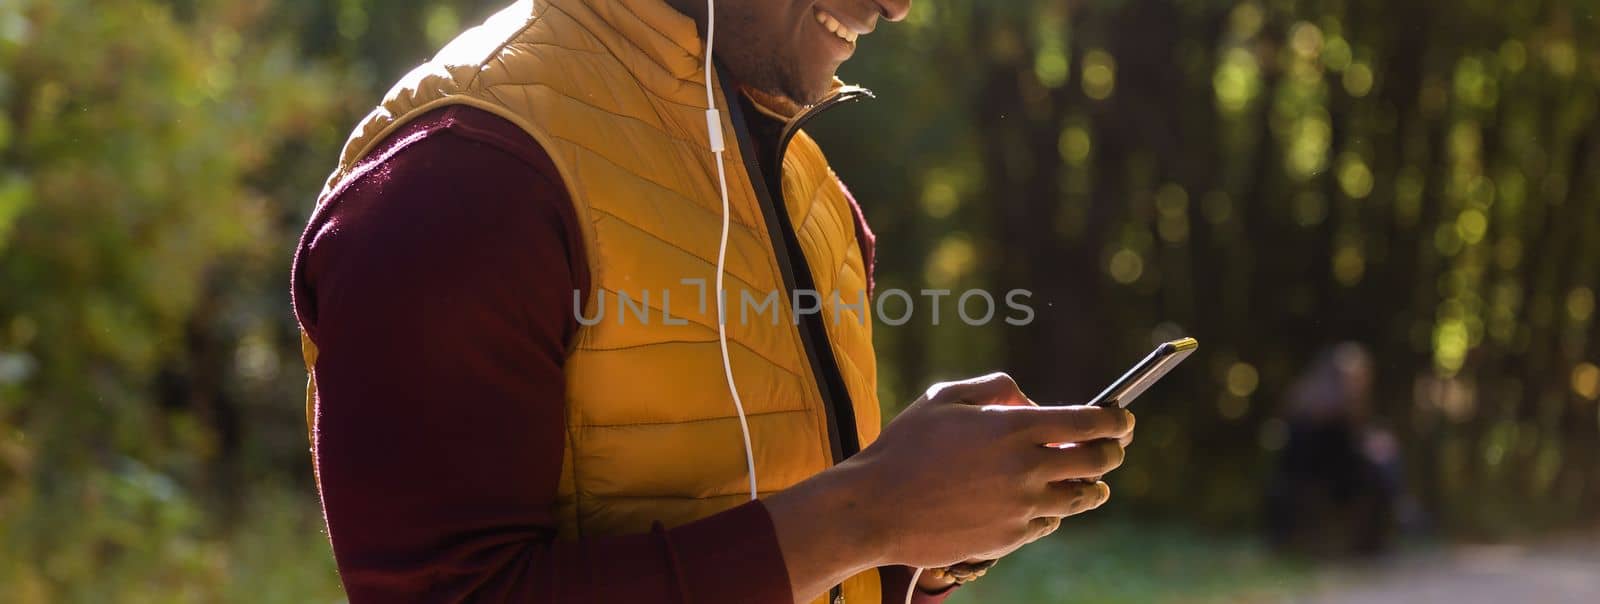 African american man using cellphone applications texting message in messengers, male black hands holding phone working playing game on smartphone, mobile technology lifestyle concept, close up view by Satura86